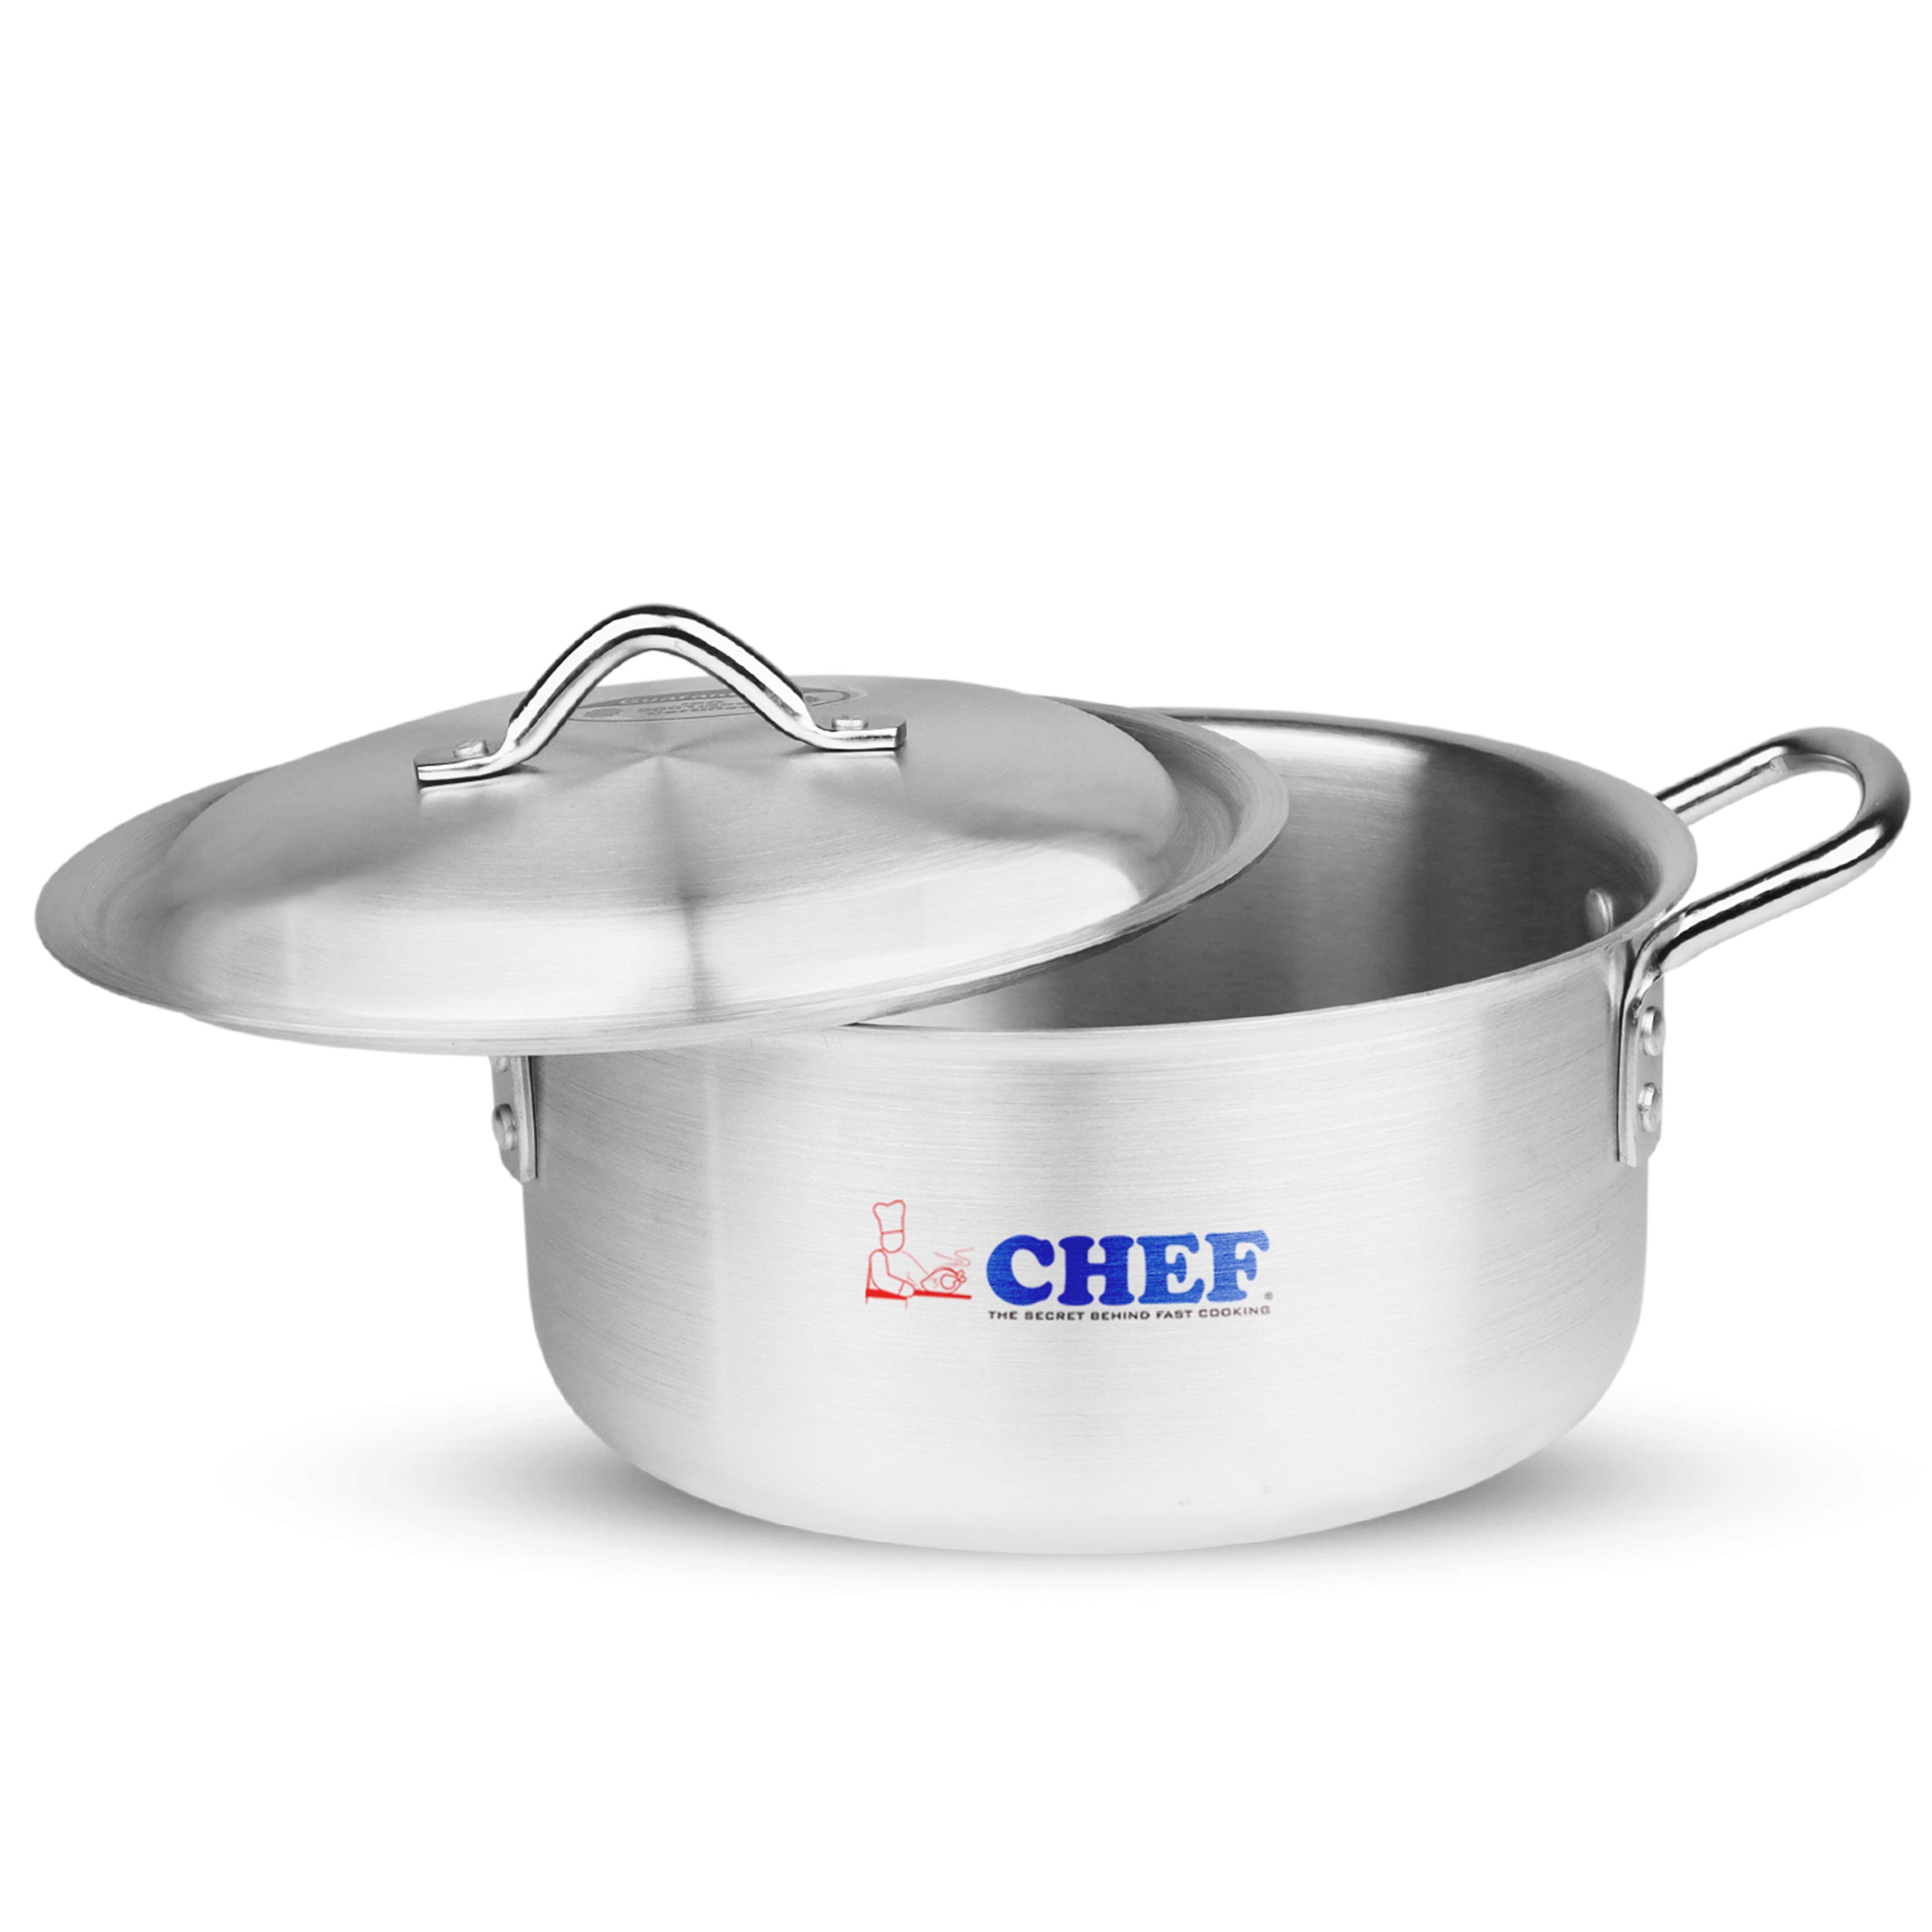 majestic chef best quality aluminum alloy metal 5 pcs casserole set / cooking pan set with silver lid at best price in Pakistan